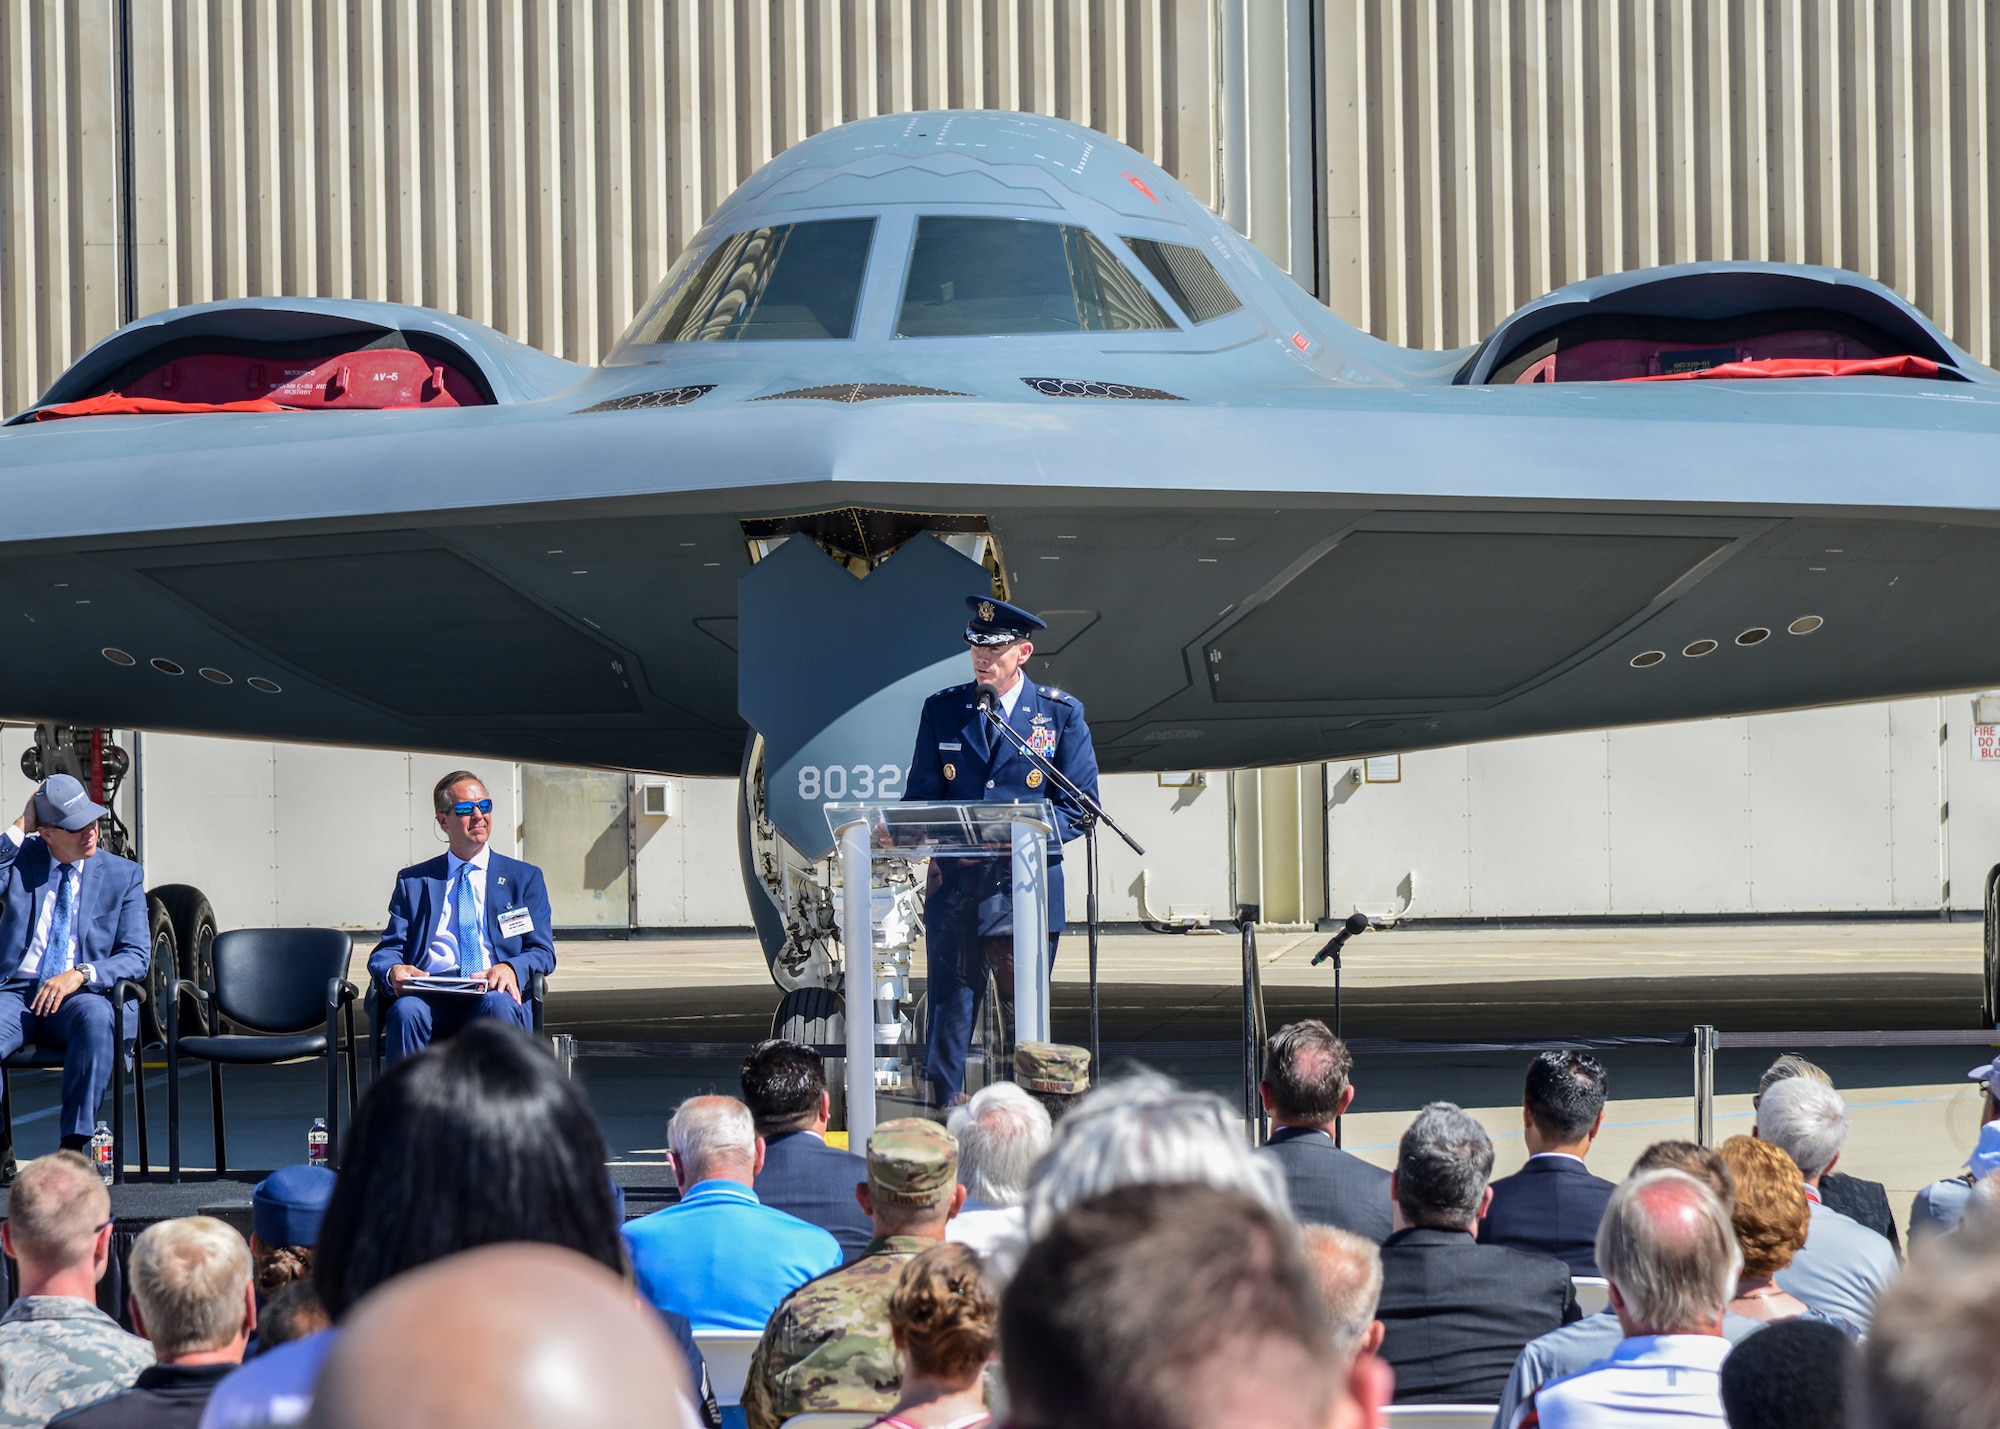 Maj. Gen. James Dawkins, 8th Air Force and Joint-Global Strike Operations commander, addresses local government officials, Airmen and Northrop Grumman employees during the B-2 Spirit's 30th anniversary celebration at Plant 42 in Palmdale, California, Aug. 20. Dawkins flew a B-2 Spirit nicknamed "The Spirit of Pennsylvania" into combat bombing missions during Operation Enduring Freedom. (U.S. Air Force photo by Giancarlo Casem)